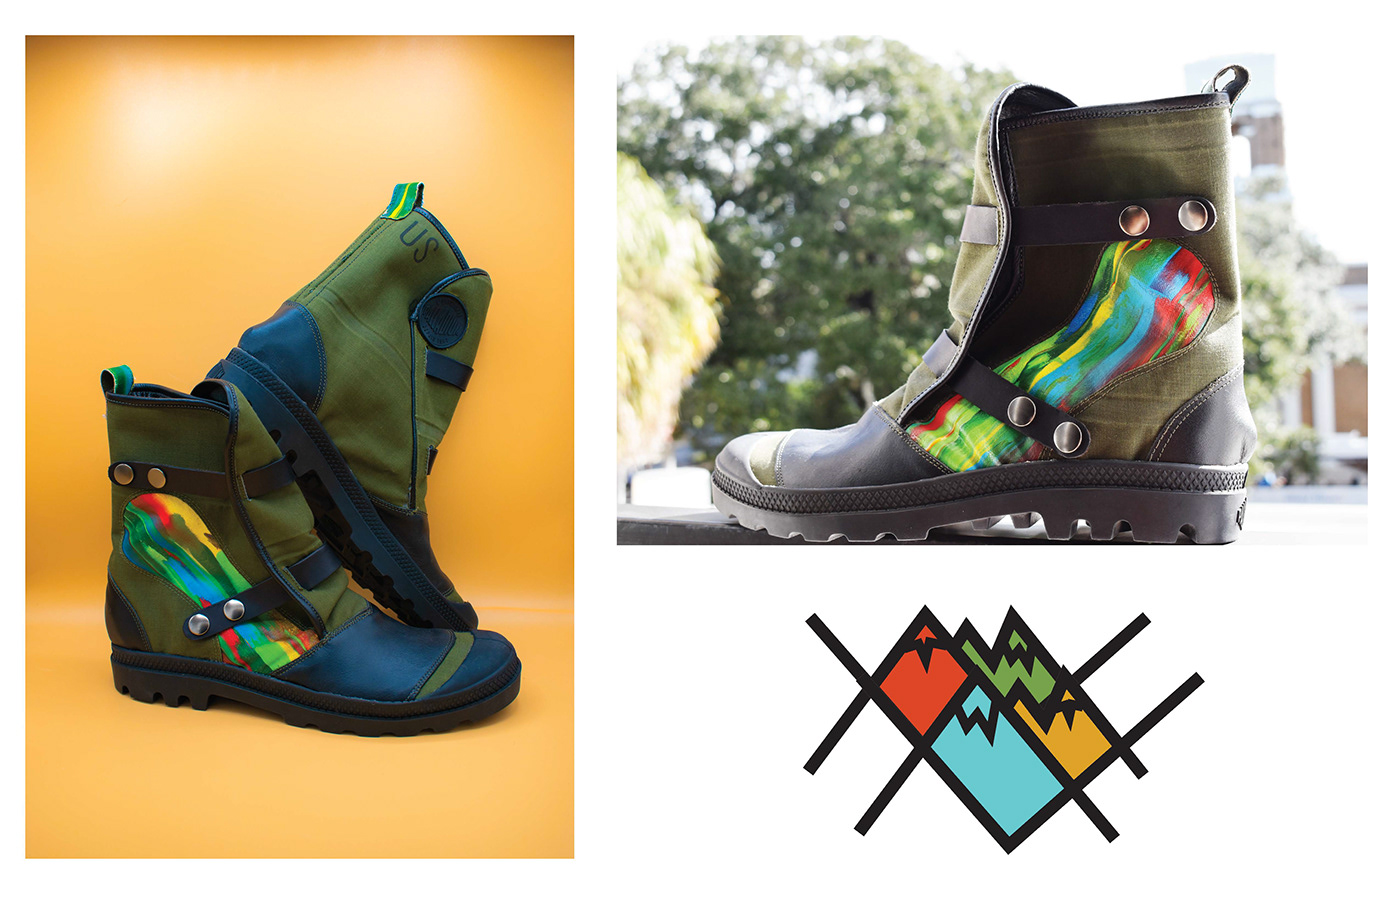 bio leather footwear design our future outdoor footwear product design  Upcycle materials